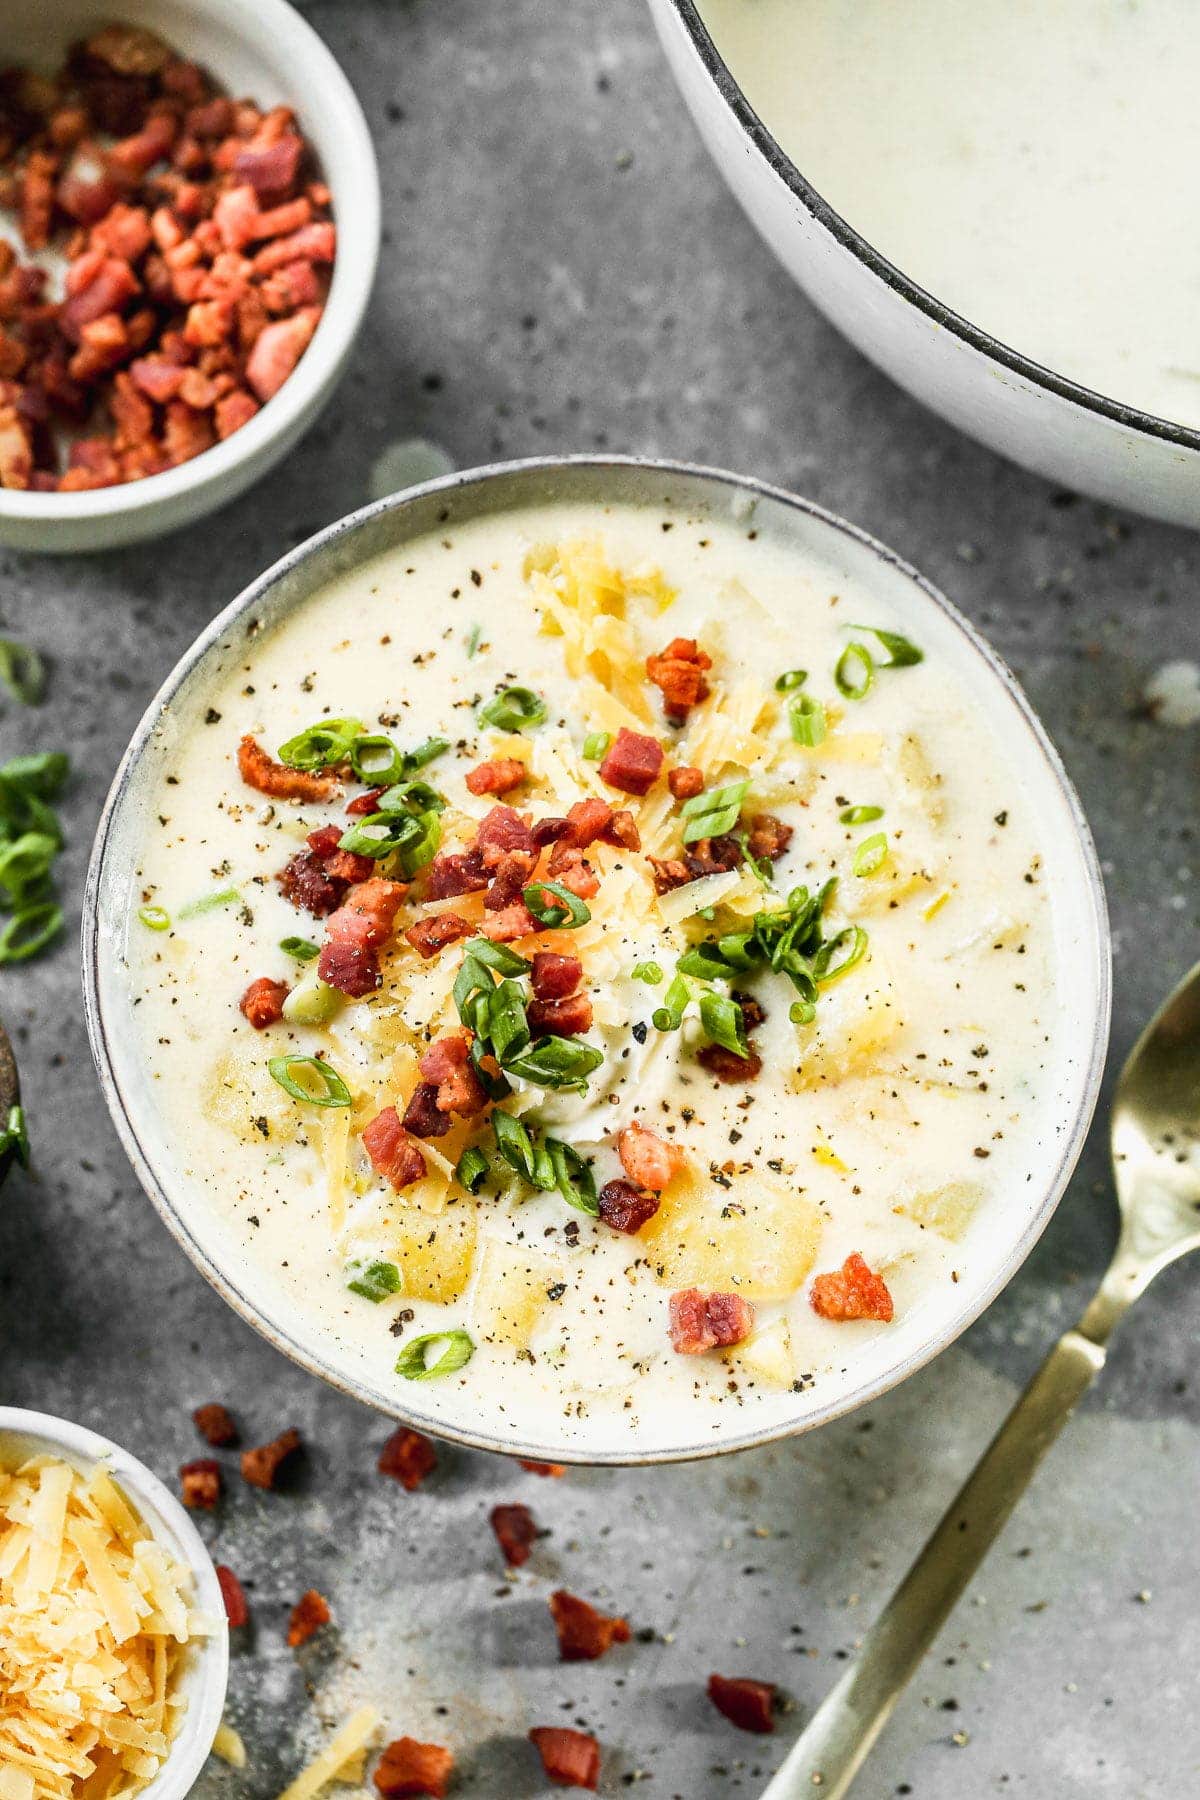 With many of the same notes as the classic, Cheesy Potato Soup is basically an elevated version of classic baked potato soup but BETTER. We swap out cheddar for aged gouda, throw in sweet leeks, tangy crème fraîche and salty pancetta for an updated version we're obsessed with. 